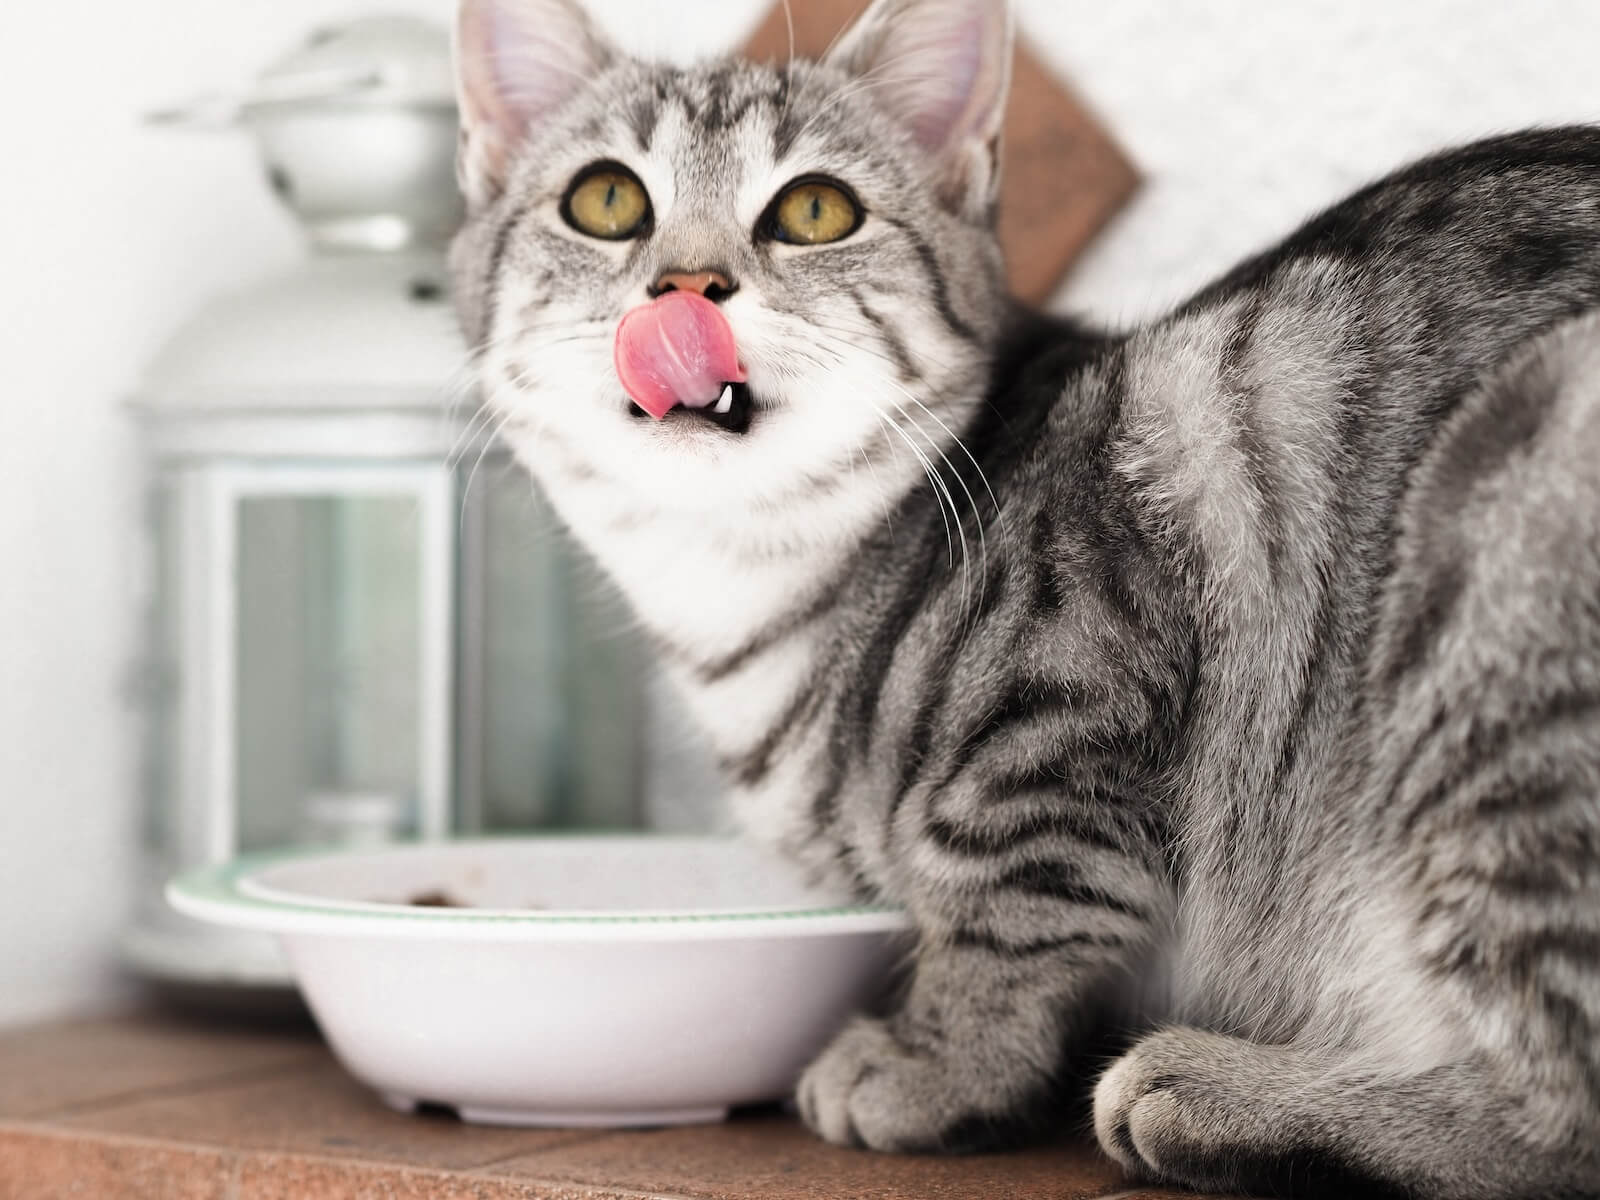 silver tabby cat in white ceramic bowl Photo by Laura Chouette on Unsplash